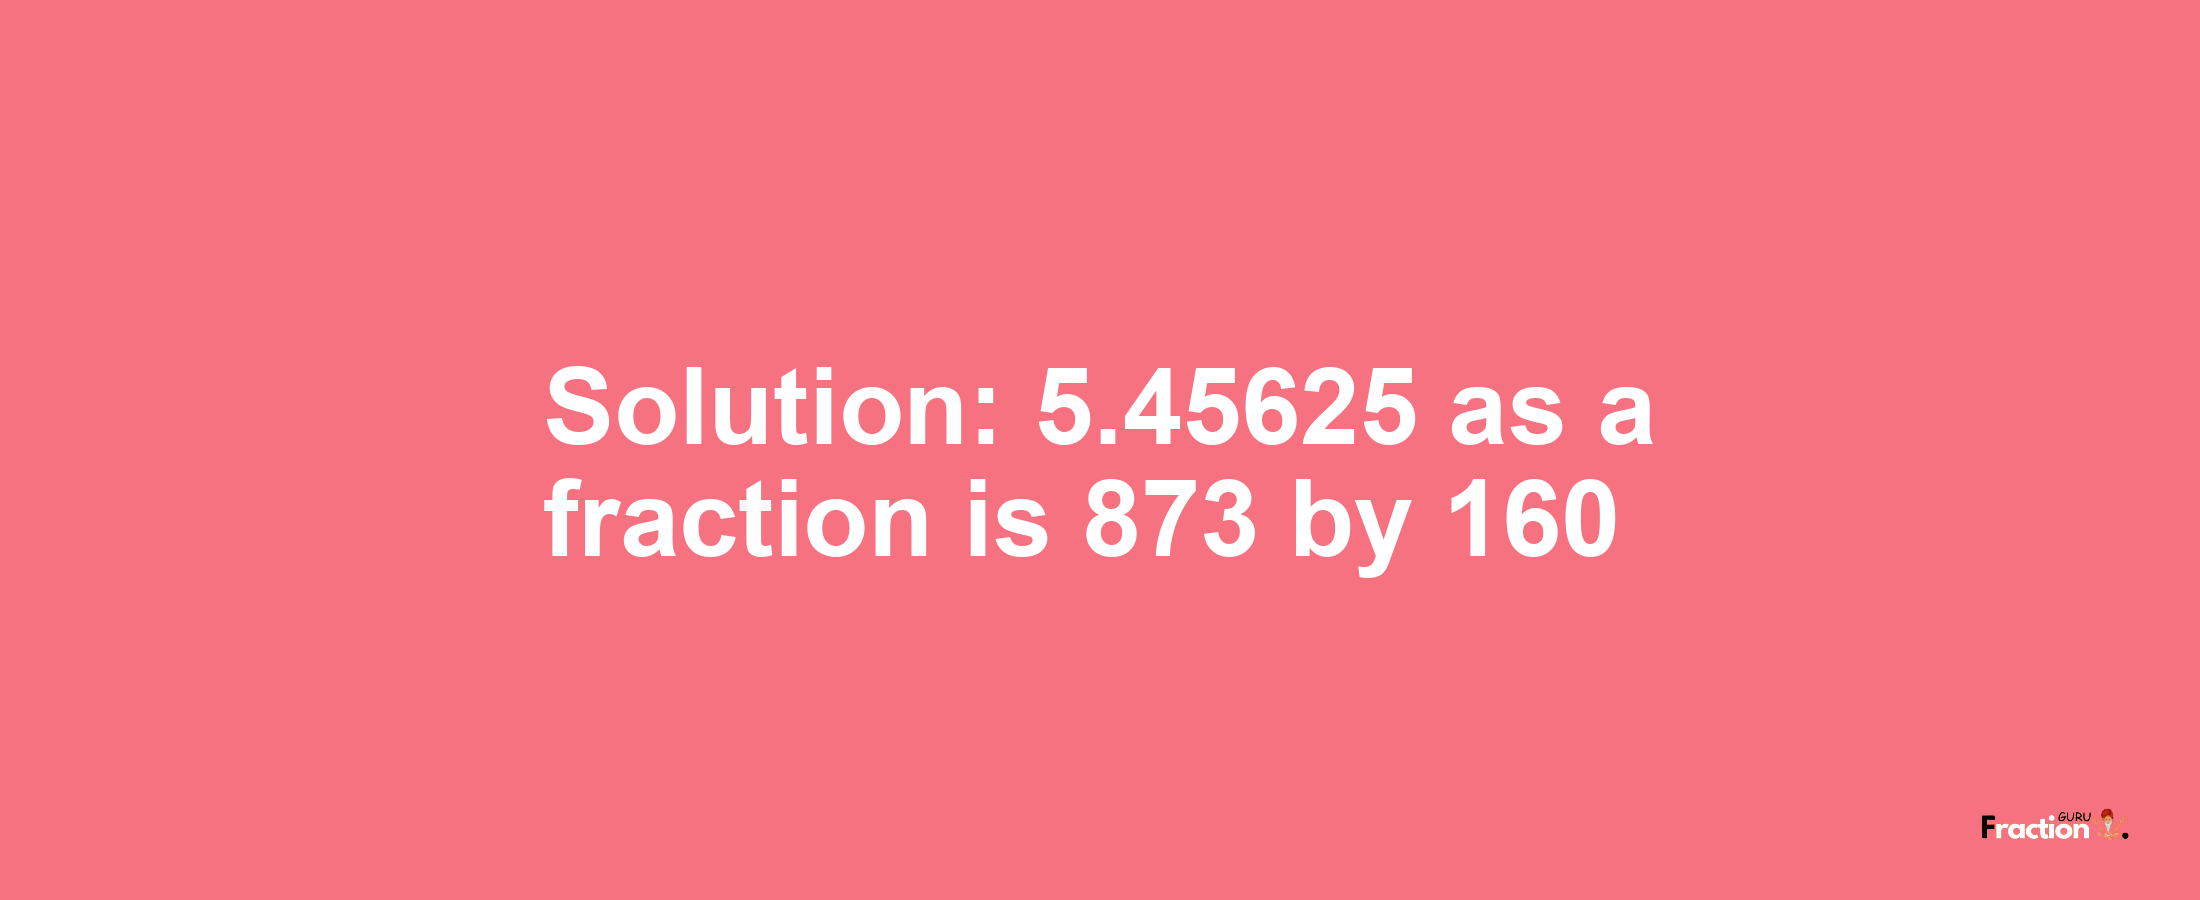 Solution:5.45625 as a fraction is 873/160